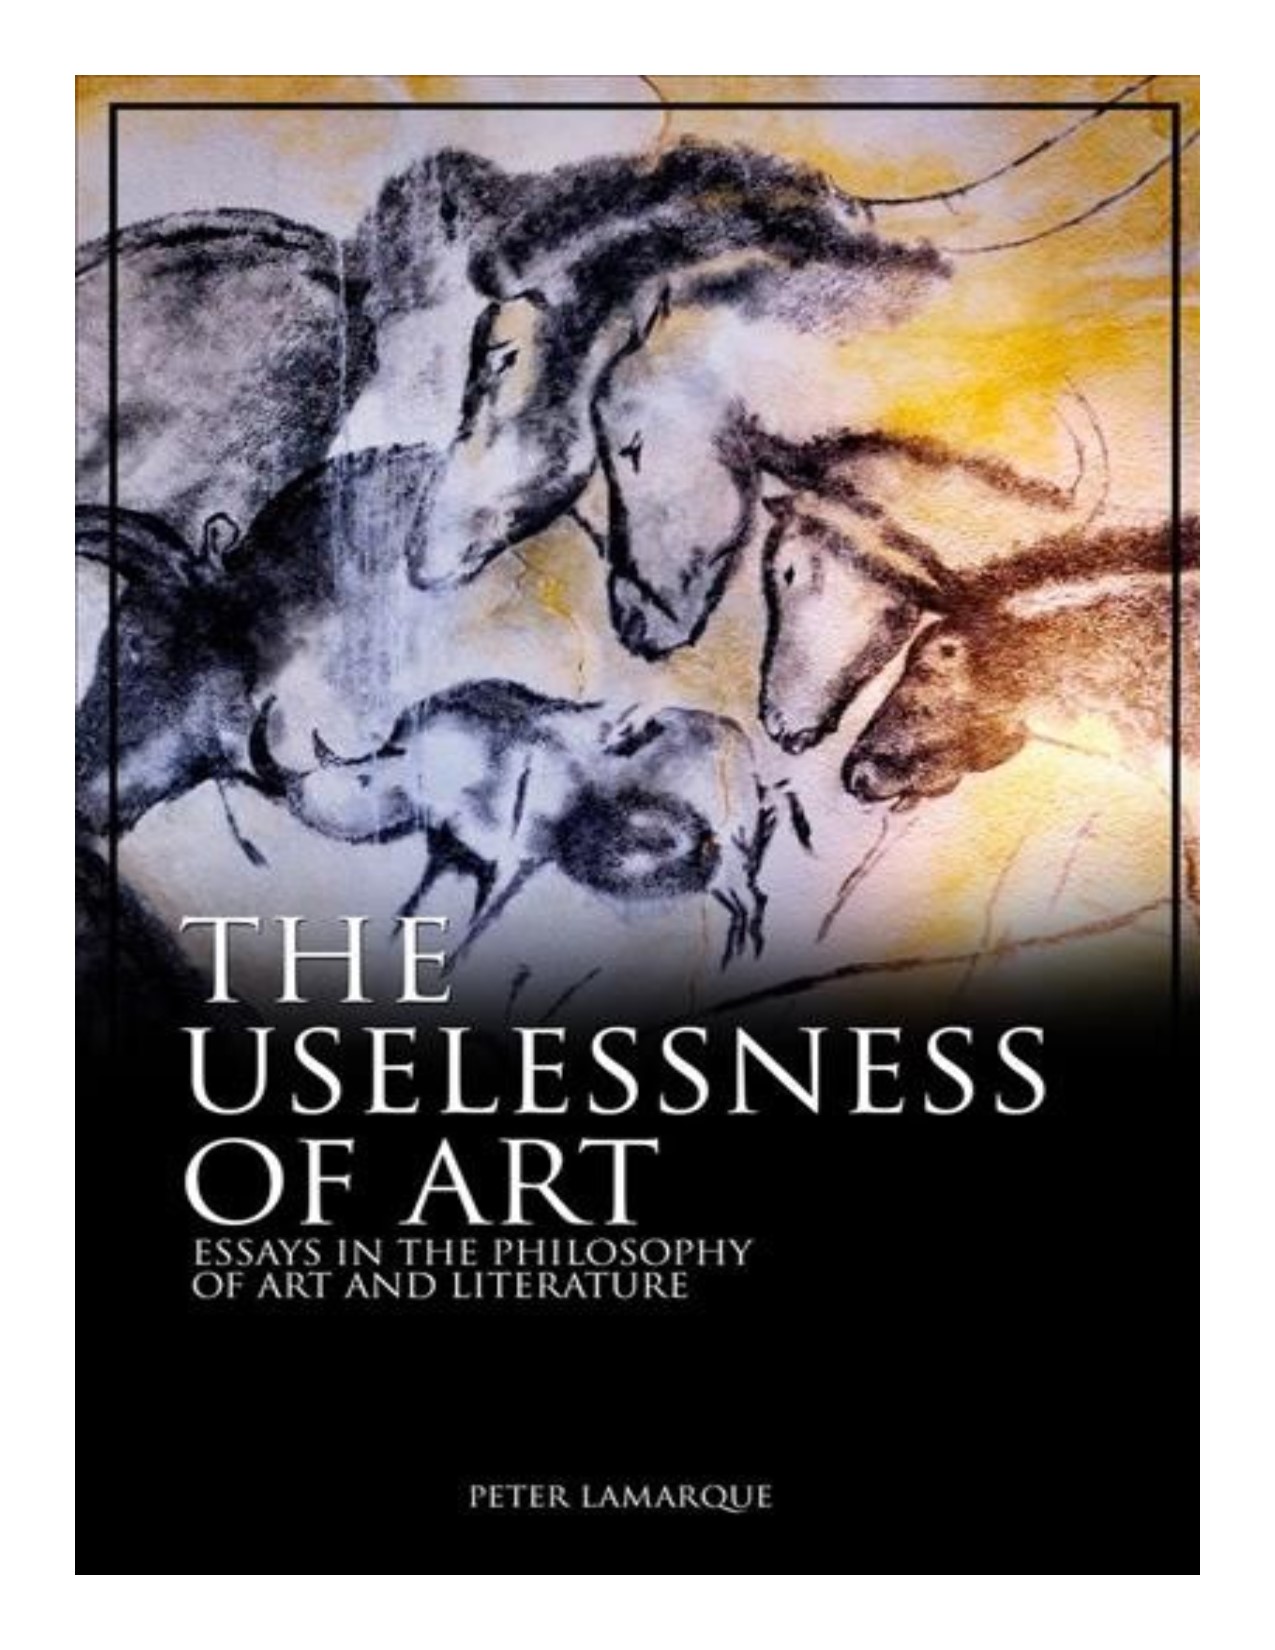 The uselessness of art essays in the philosophy of art and literature